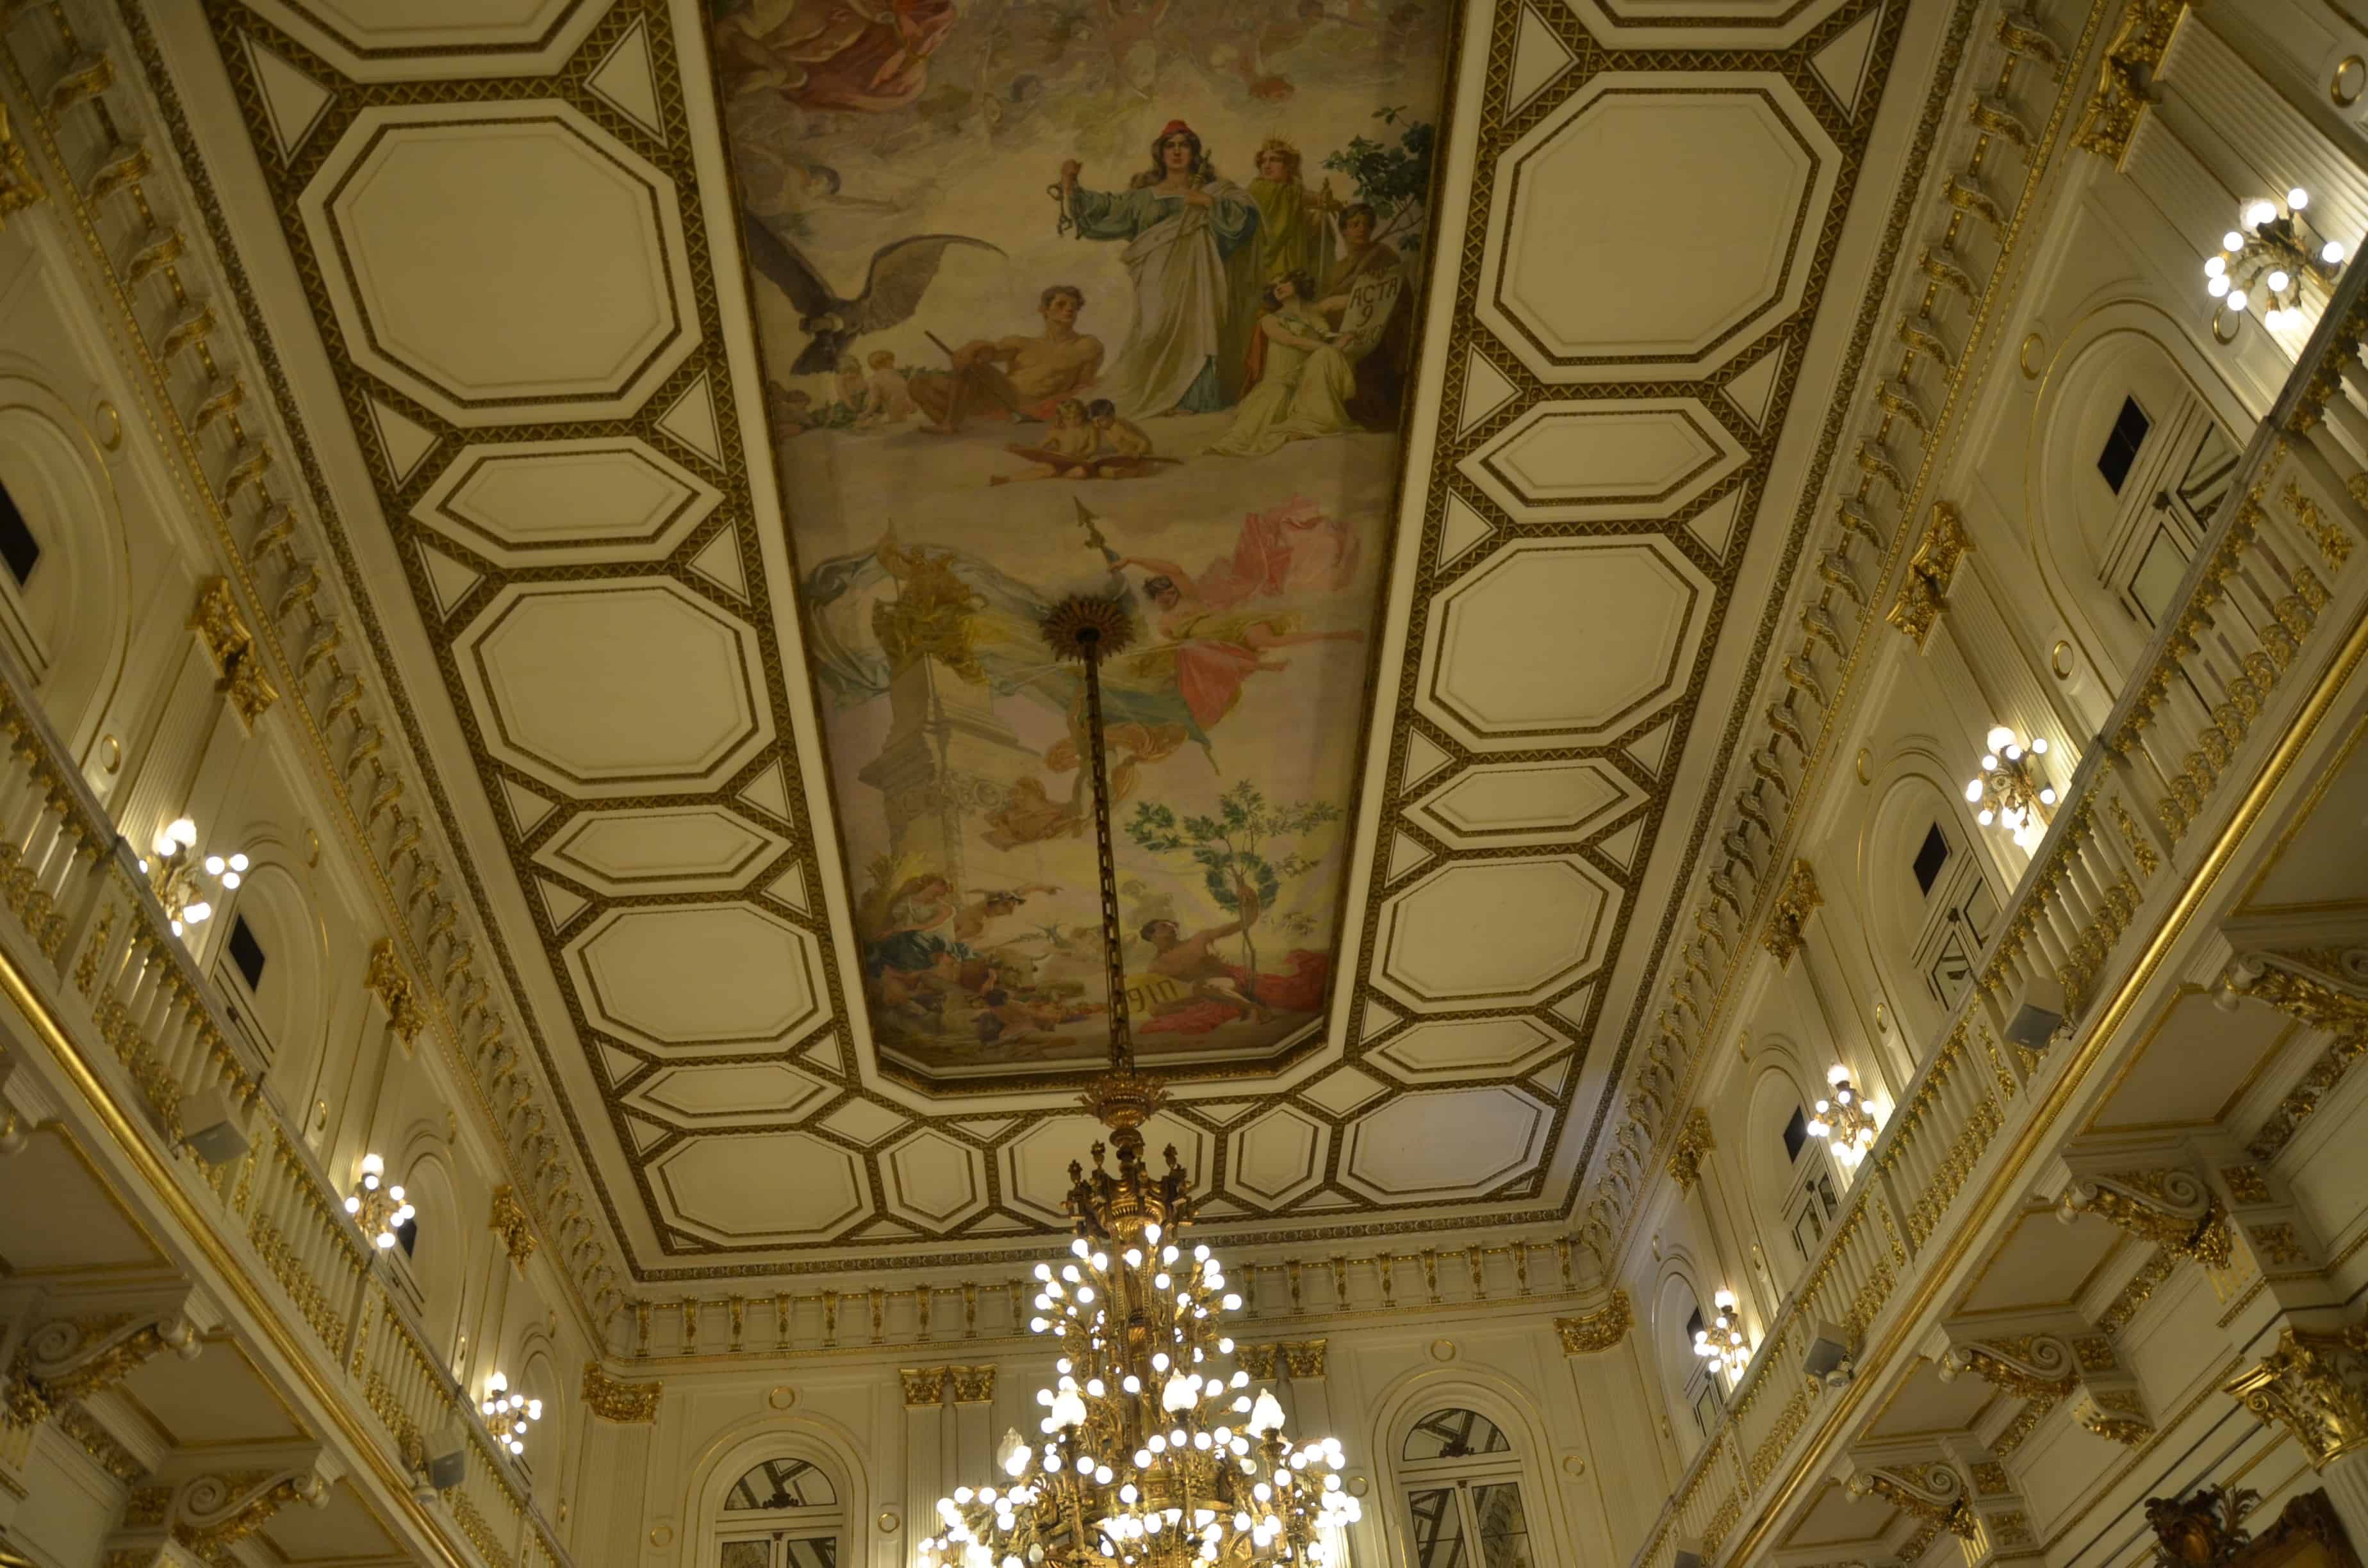 Ceiling of the White Room